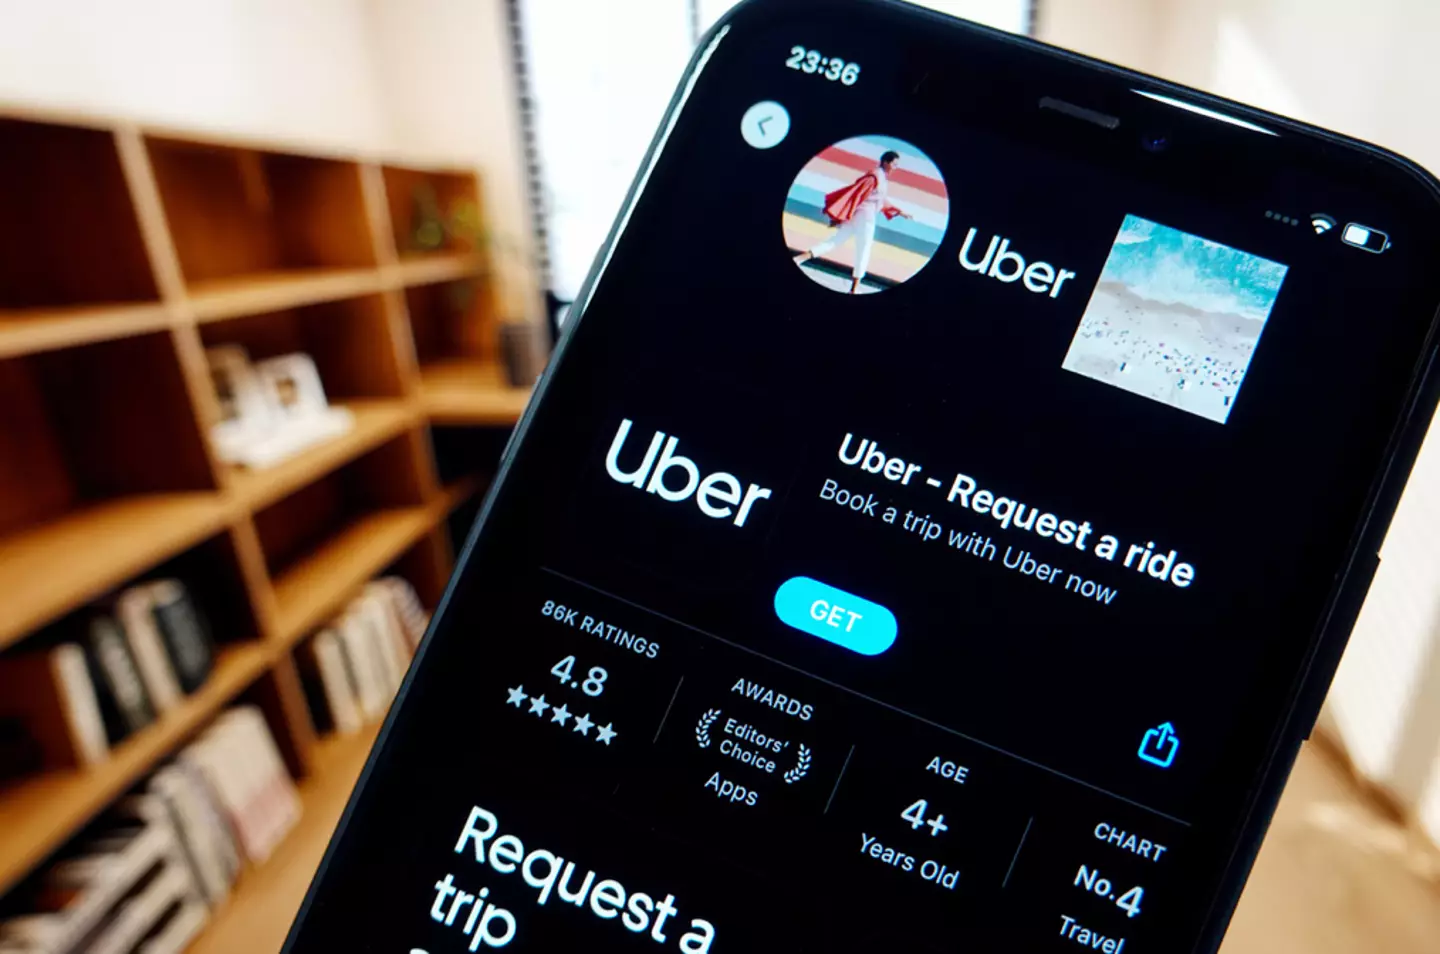 Uber is providing ways their drivers can make more cash.